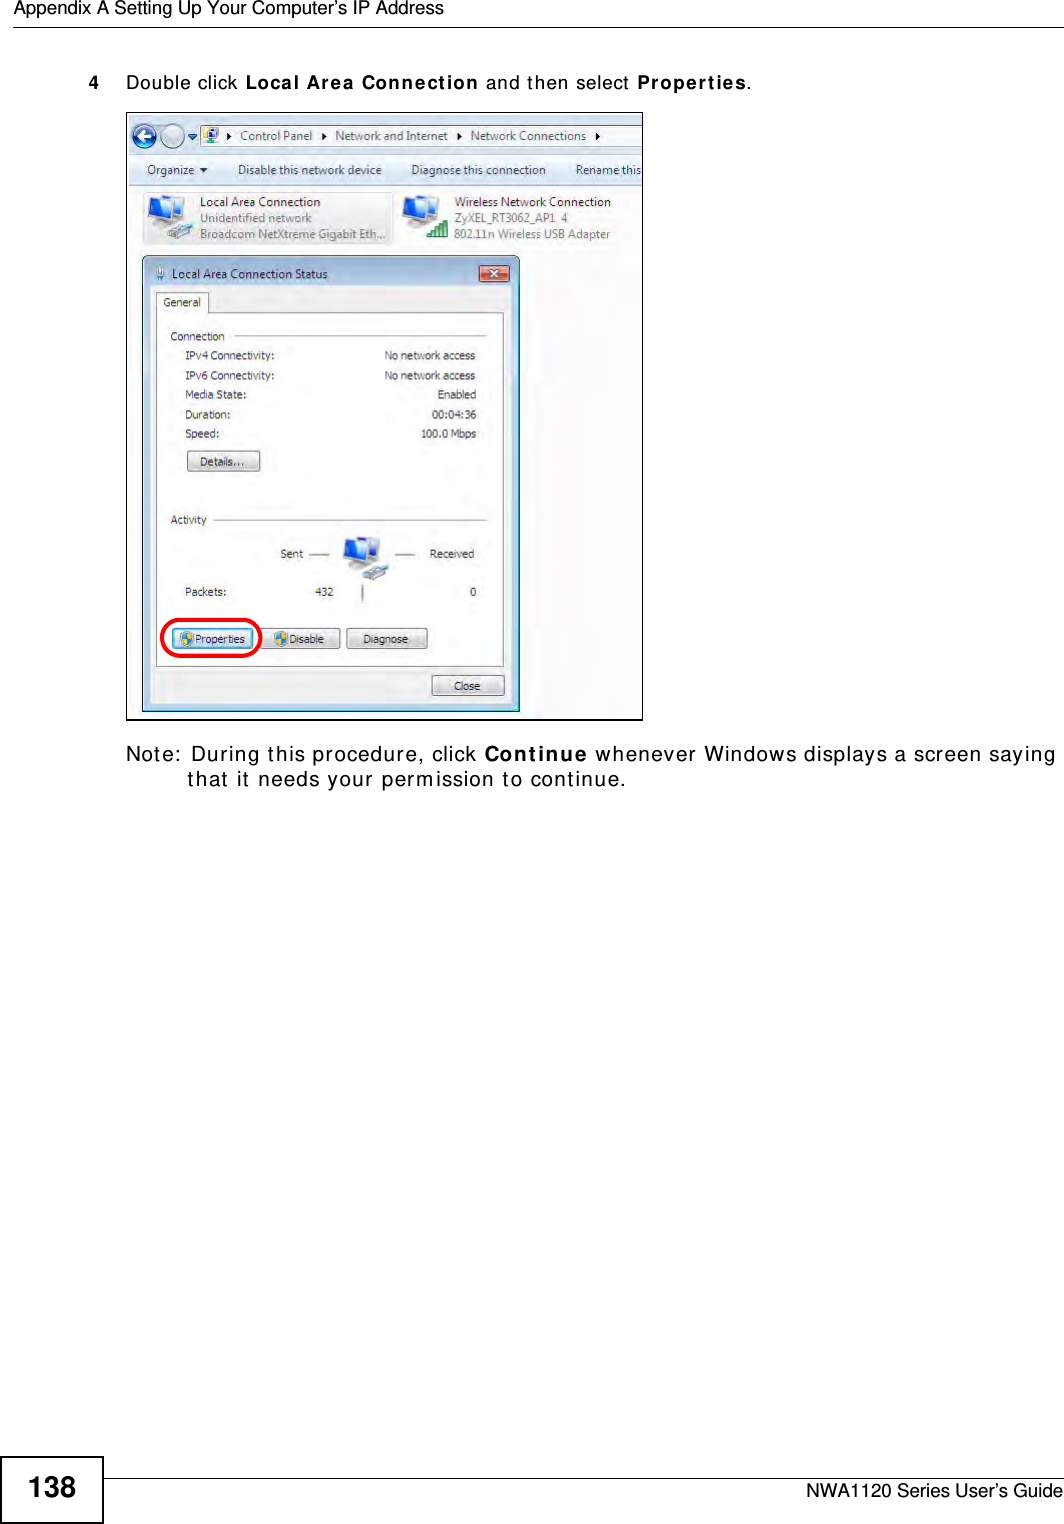 Appendix A Setting Up Your Computer’s IP AddressNWA1120 Series User’s Guide1384Double click Local Area Connection and then select Properties.Note: During this procedure, click Continue whenever Windows displays a screen saying that it needs your permission to continue.